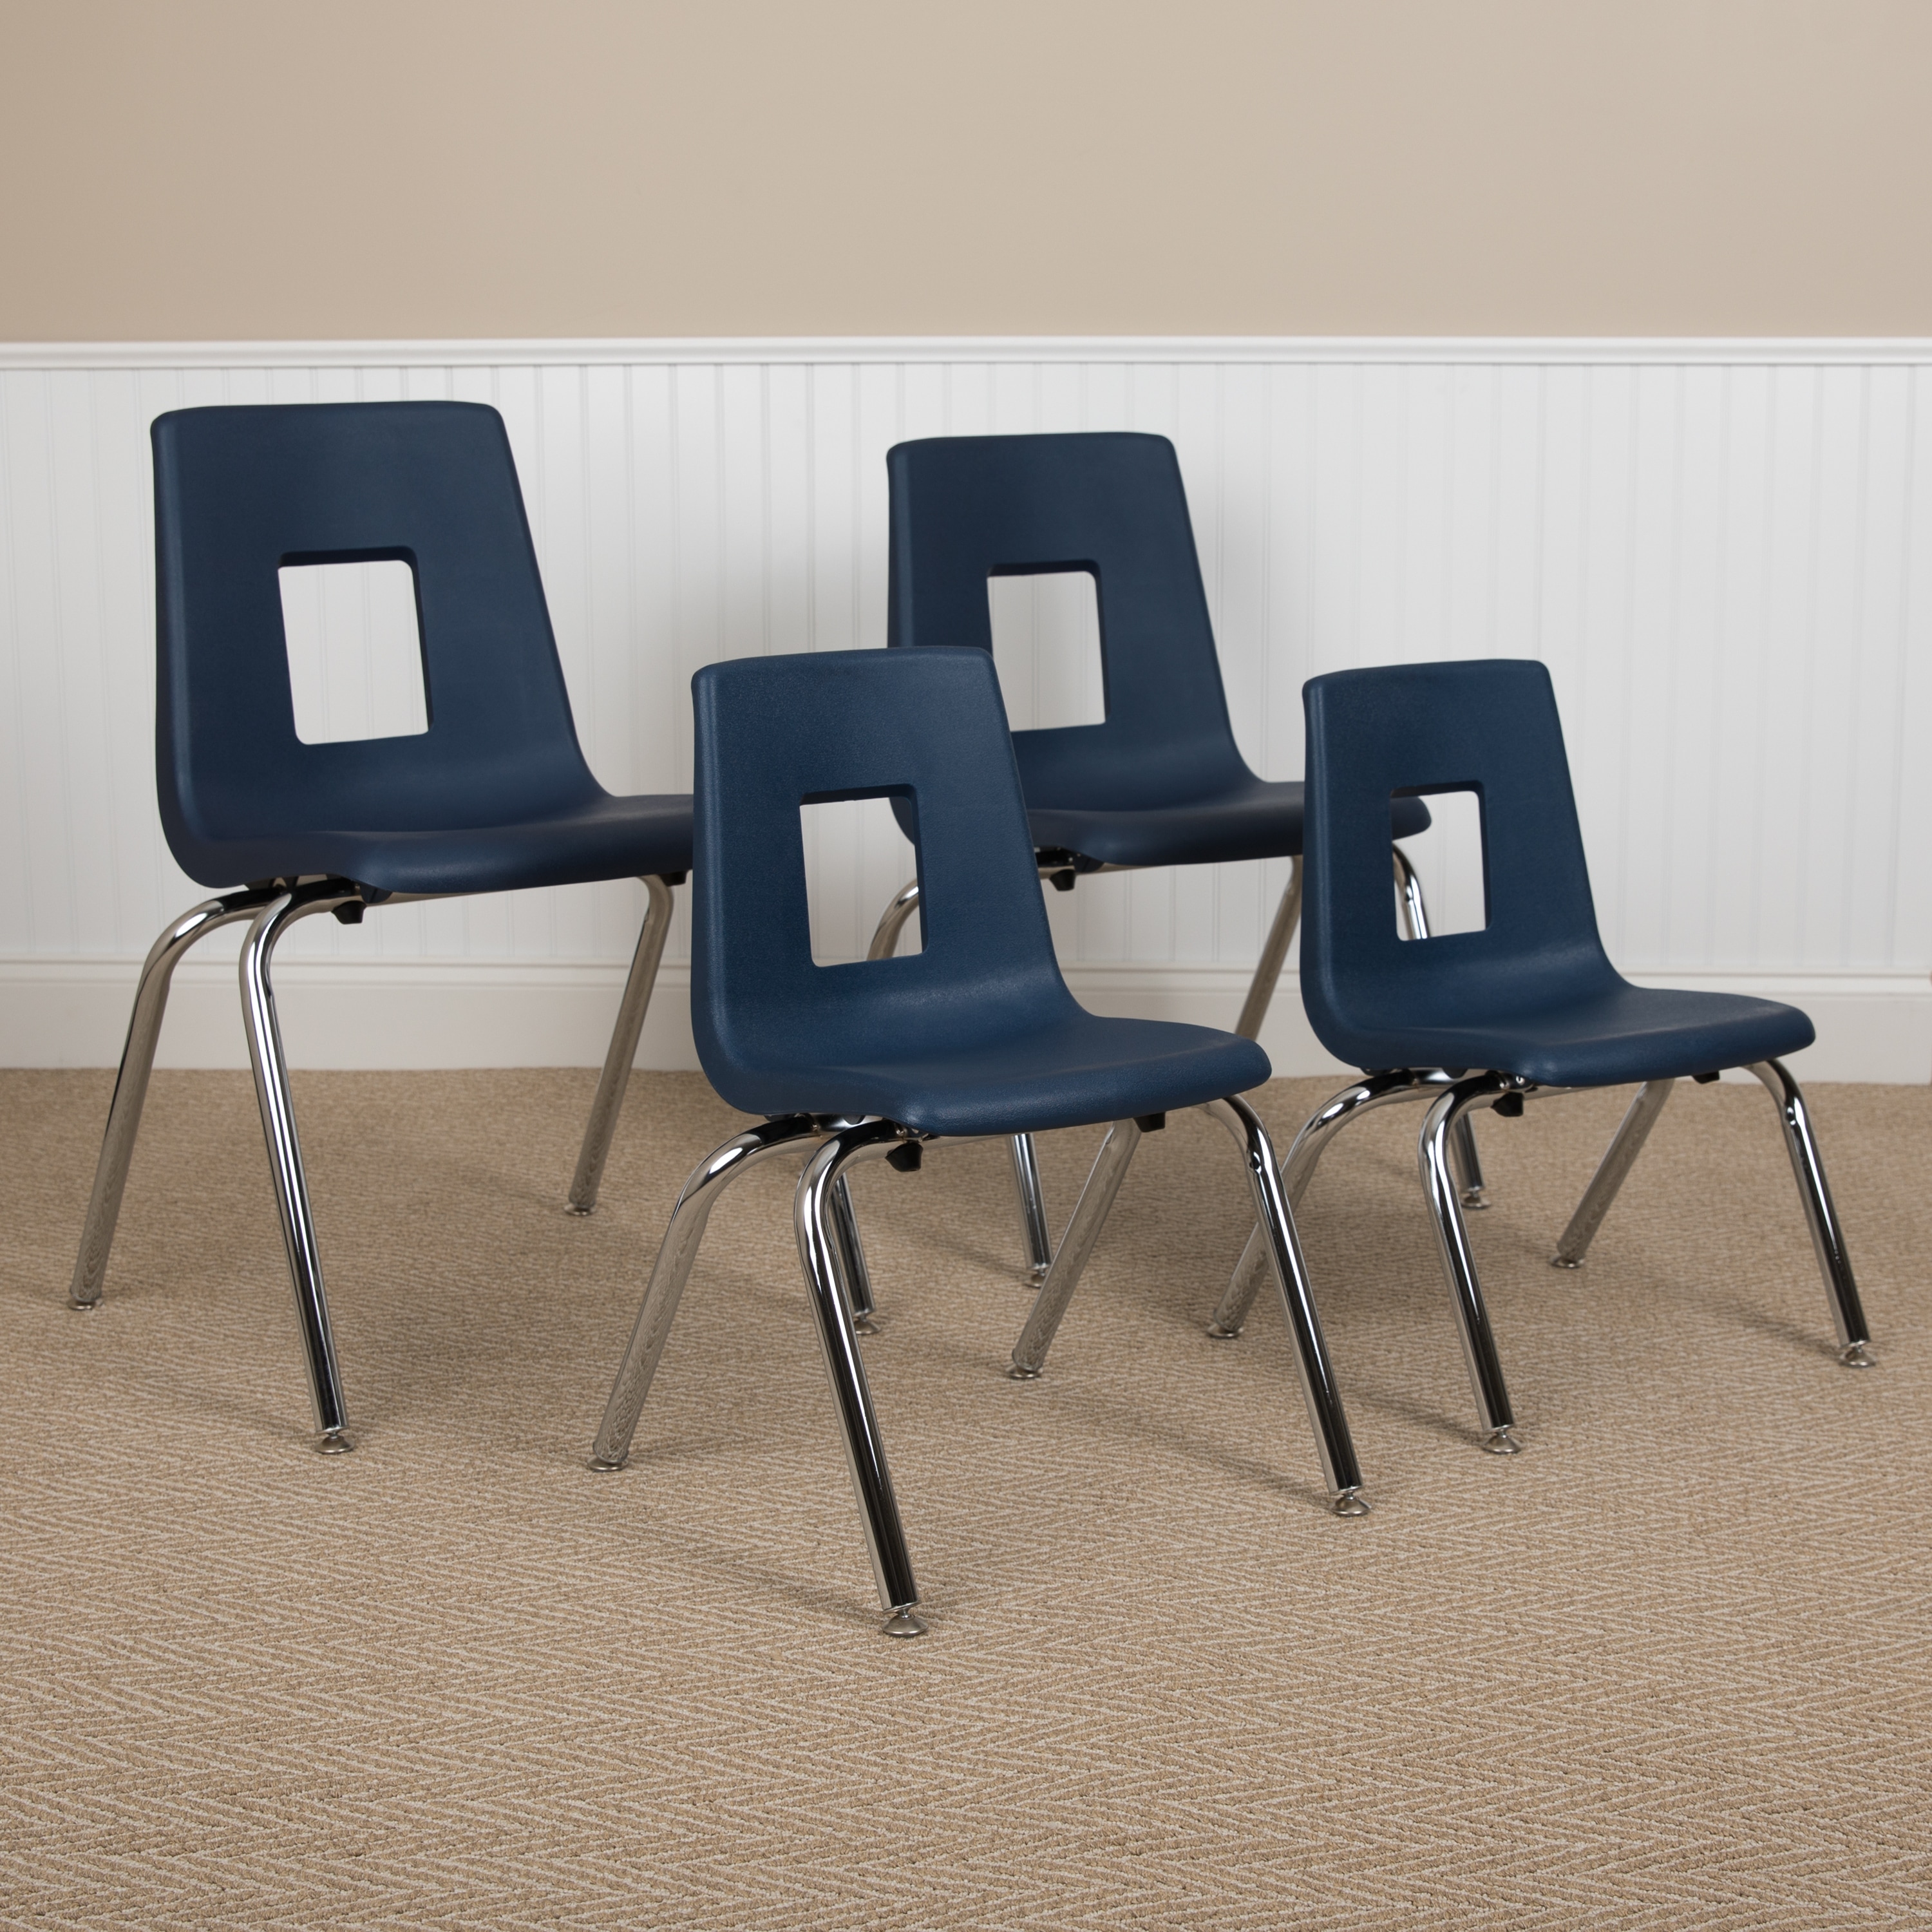 5-Pack 18 School Stack Chair, Stacking Student Chairs with Chromed Steel Legs and Nylon Swivel Glides Black 